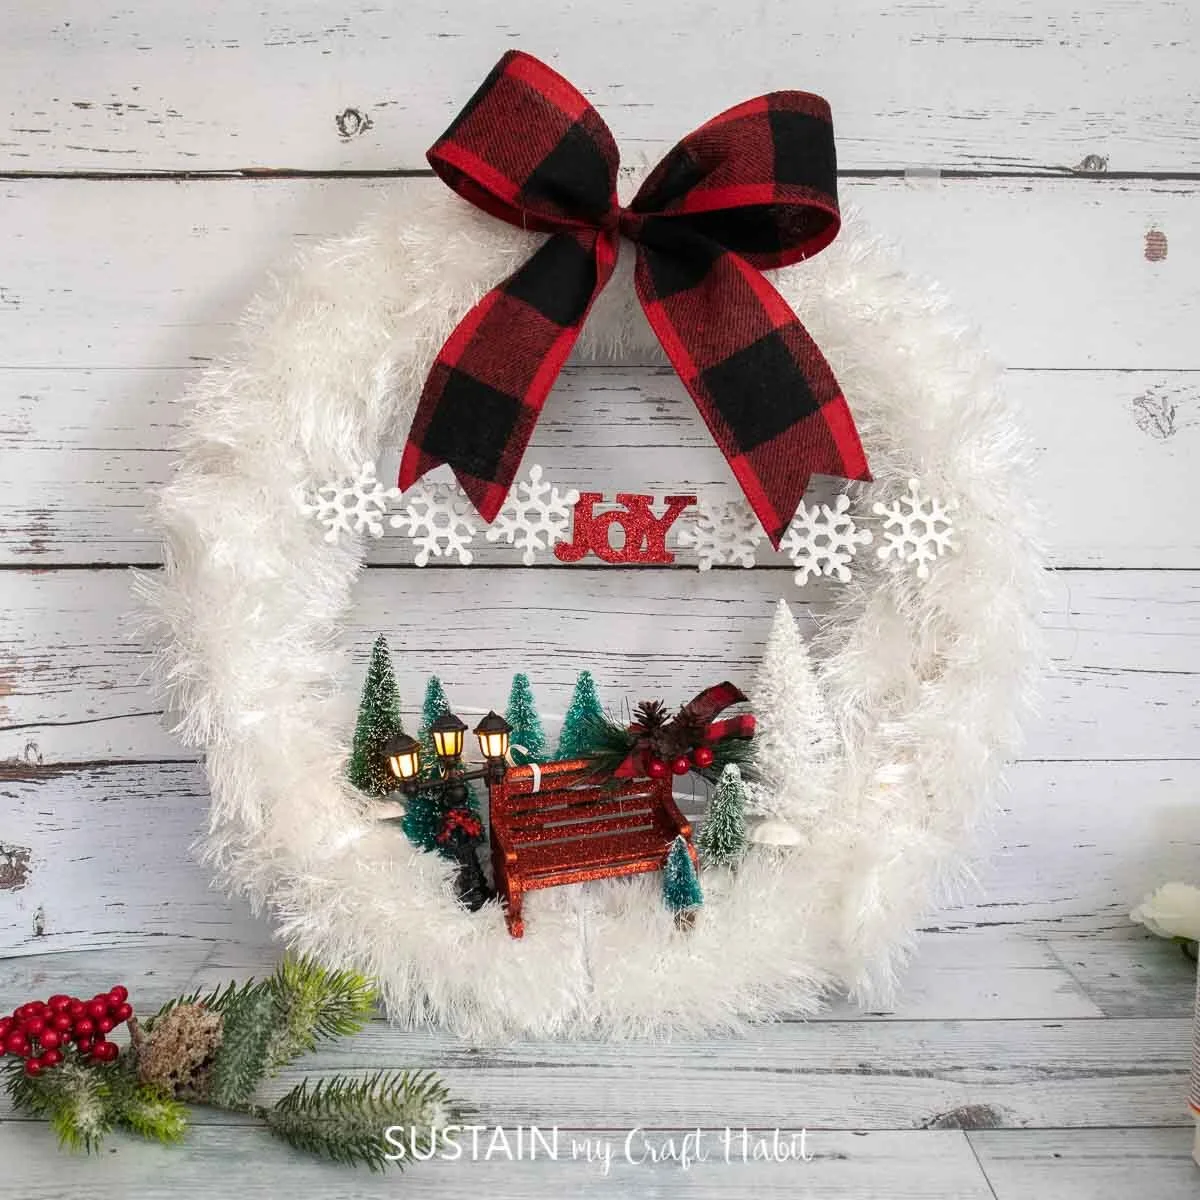 Wintry scarf wreath embellished with ribbon, bottle brush trees and miniature bench and lamp.